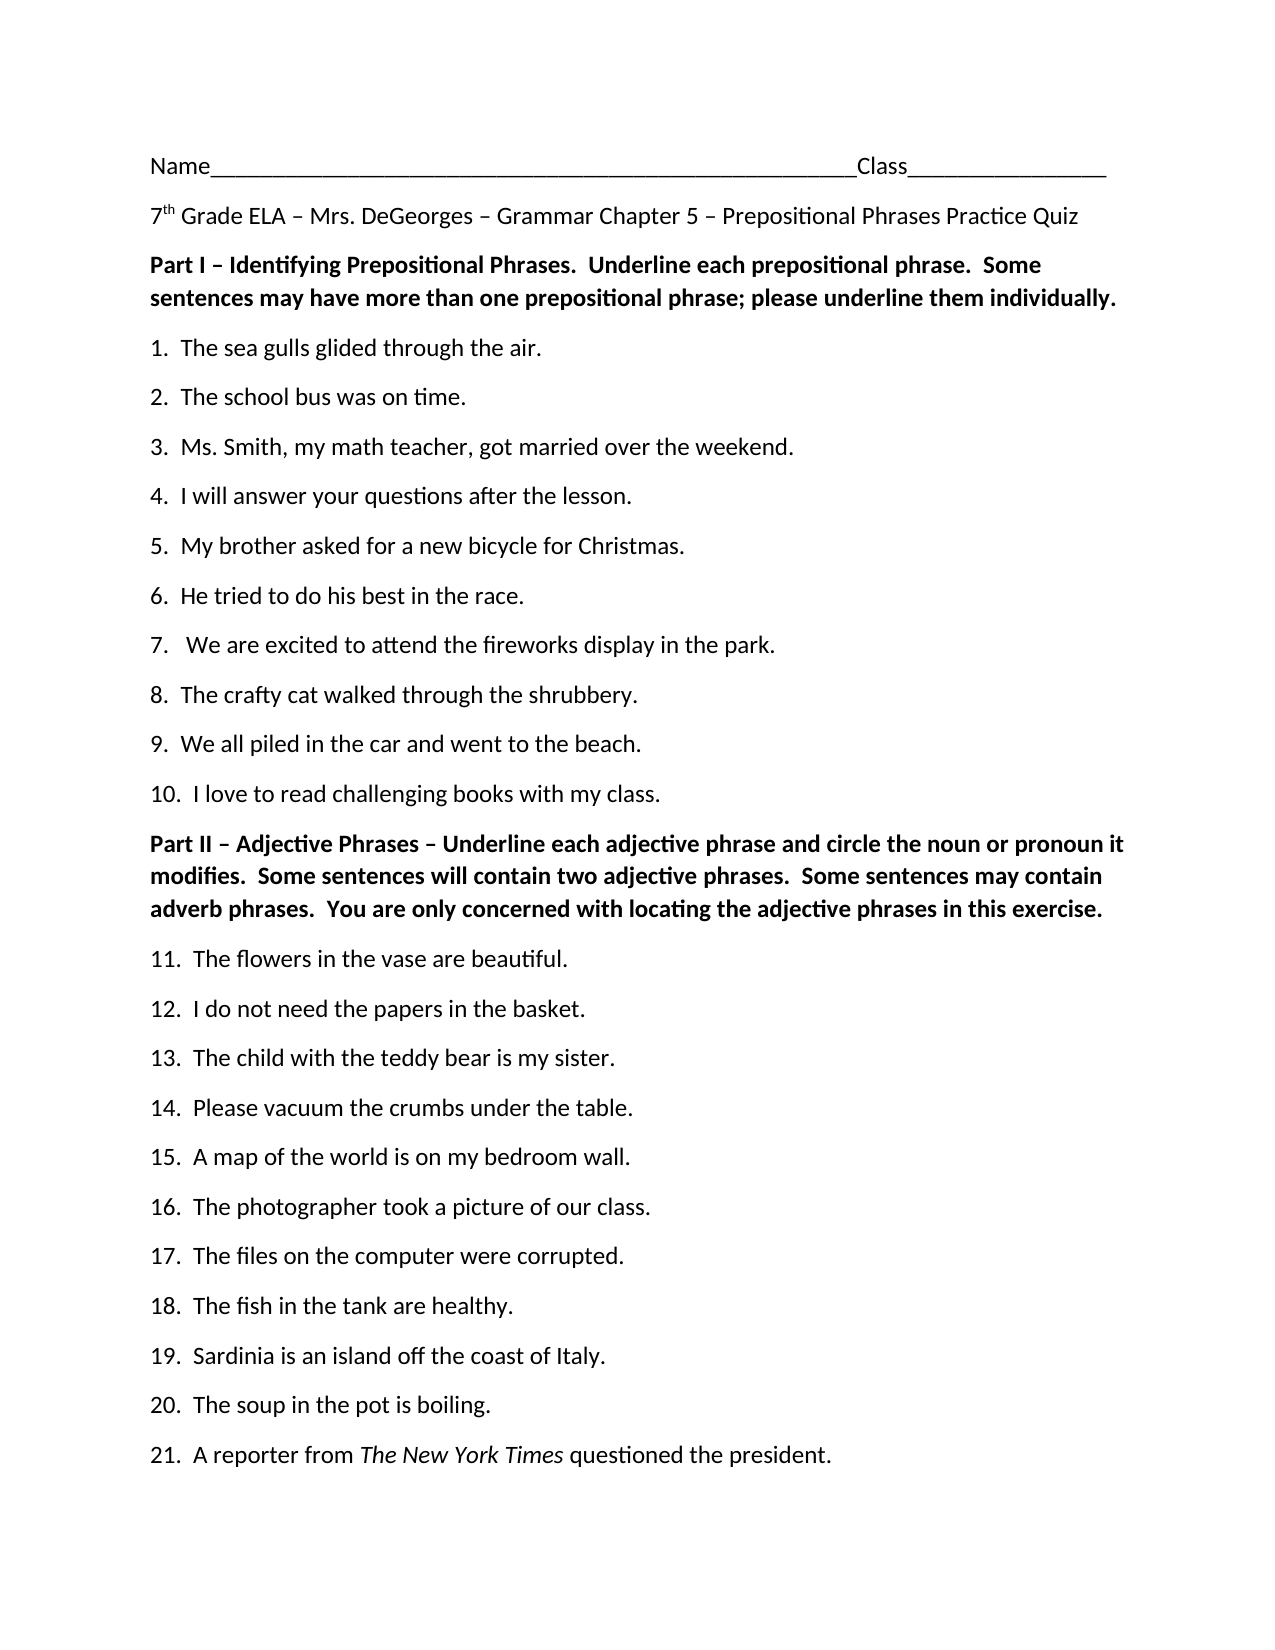 Phrases Worksheet For Class 7 With Answers